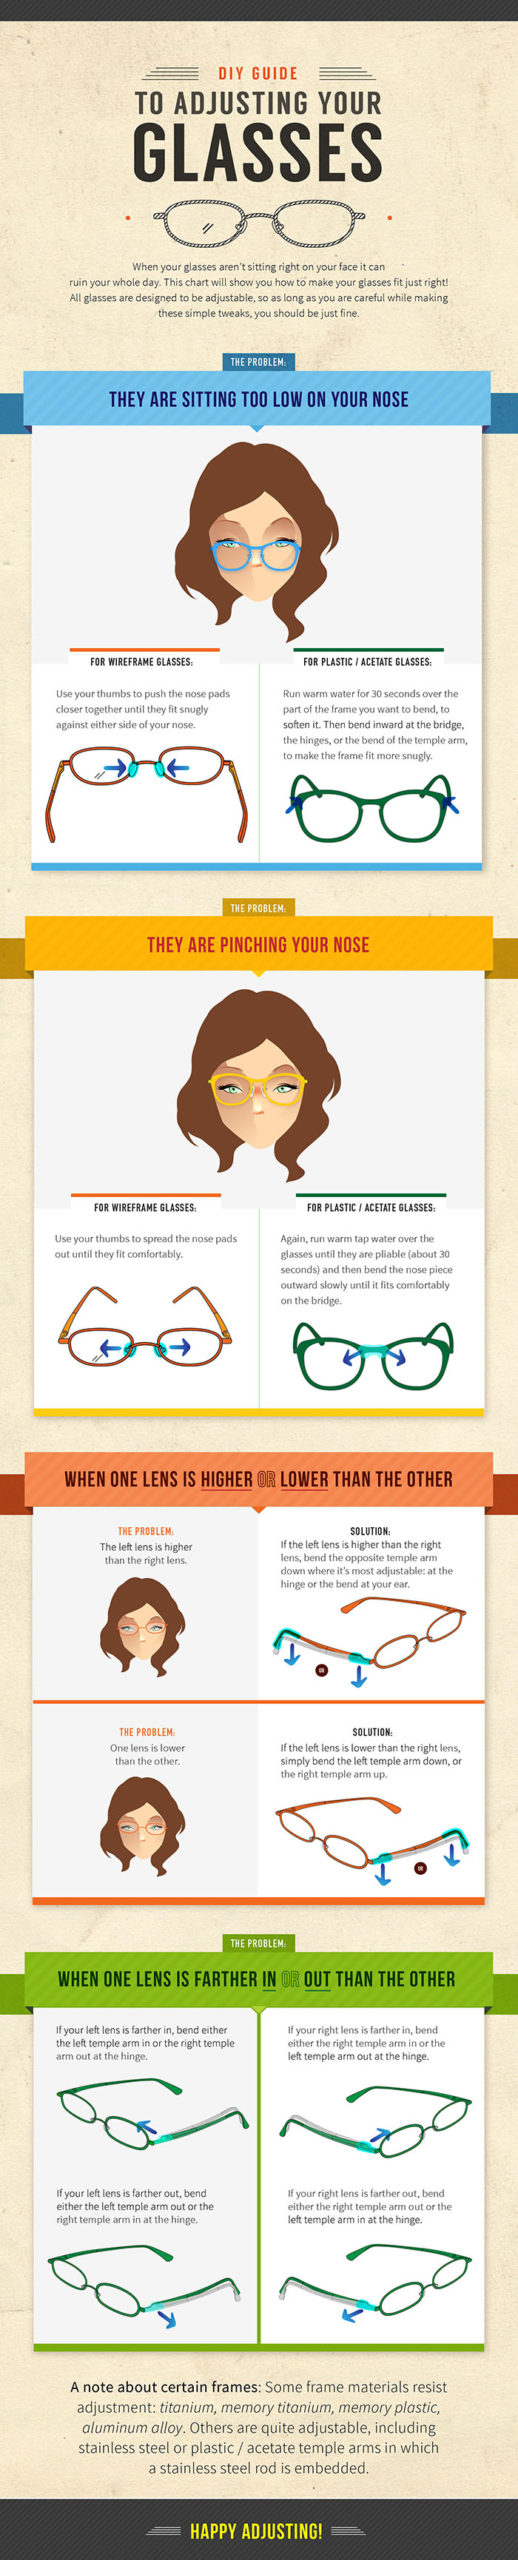 A DIY Guide To Adjusting Your Own Glasses